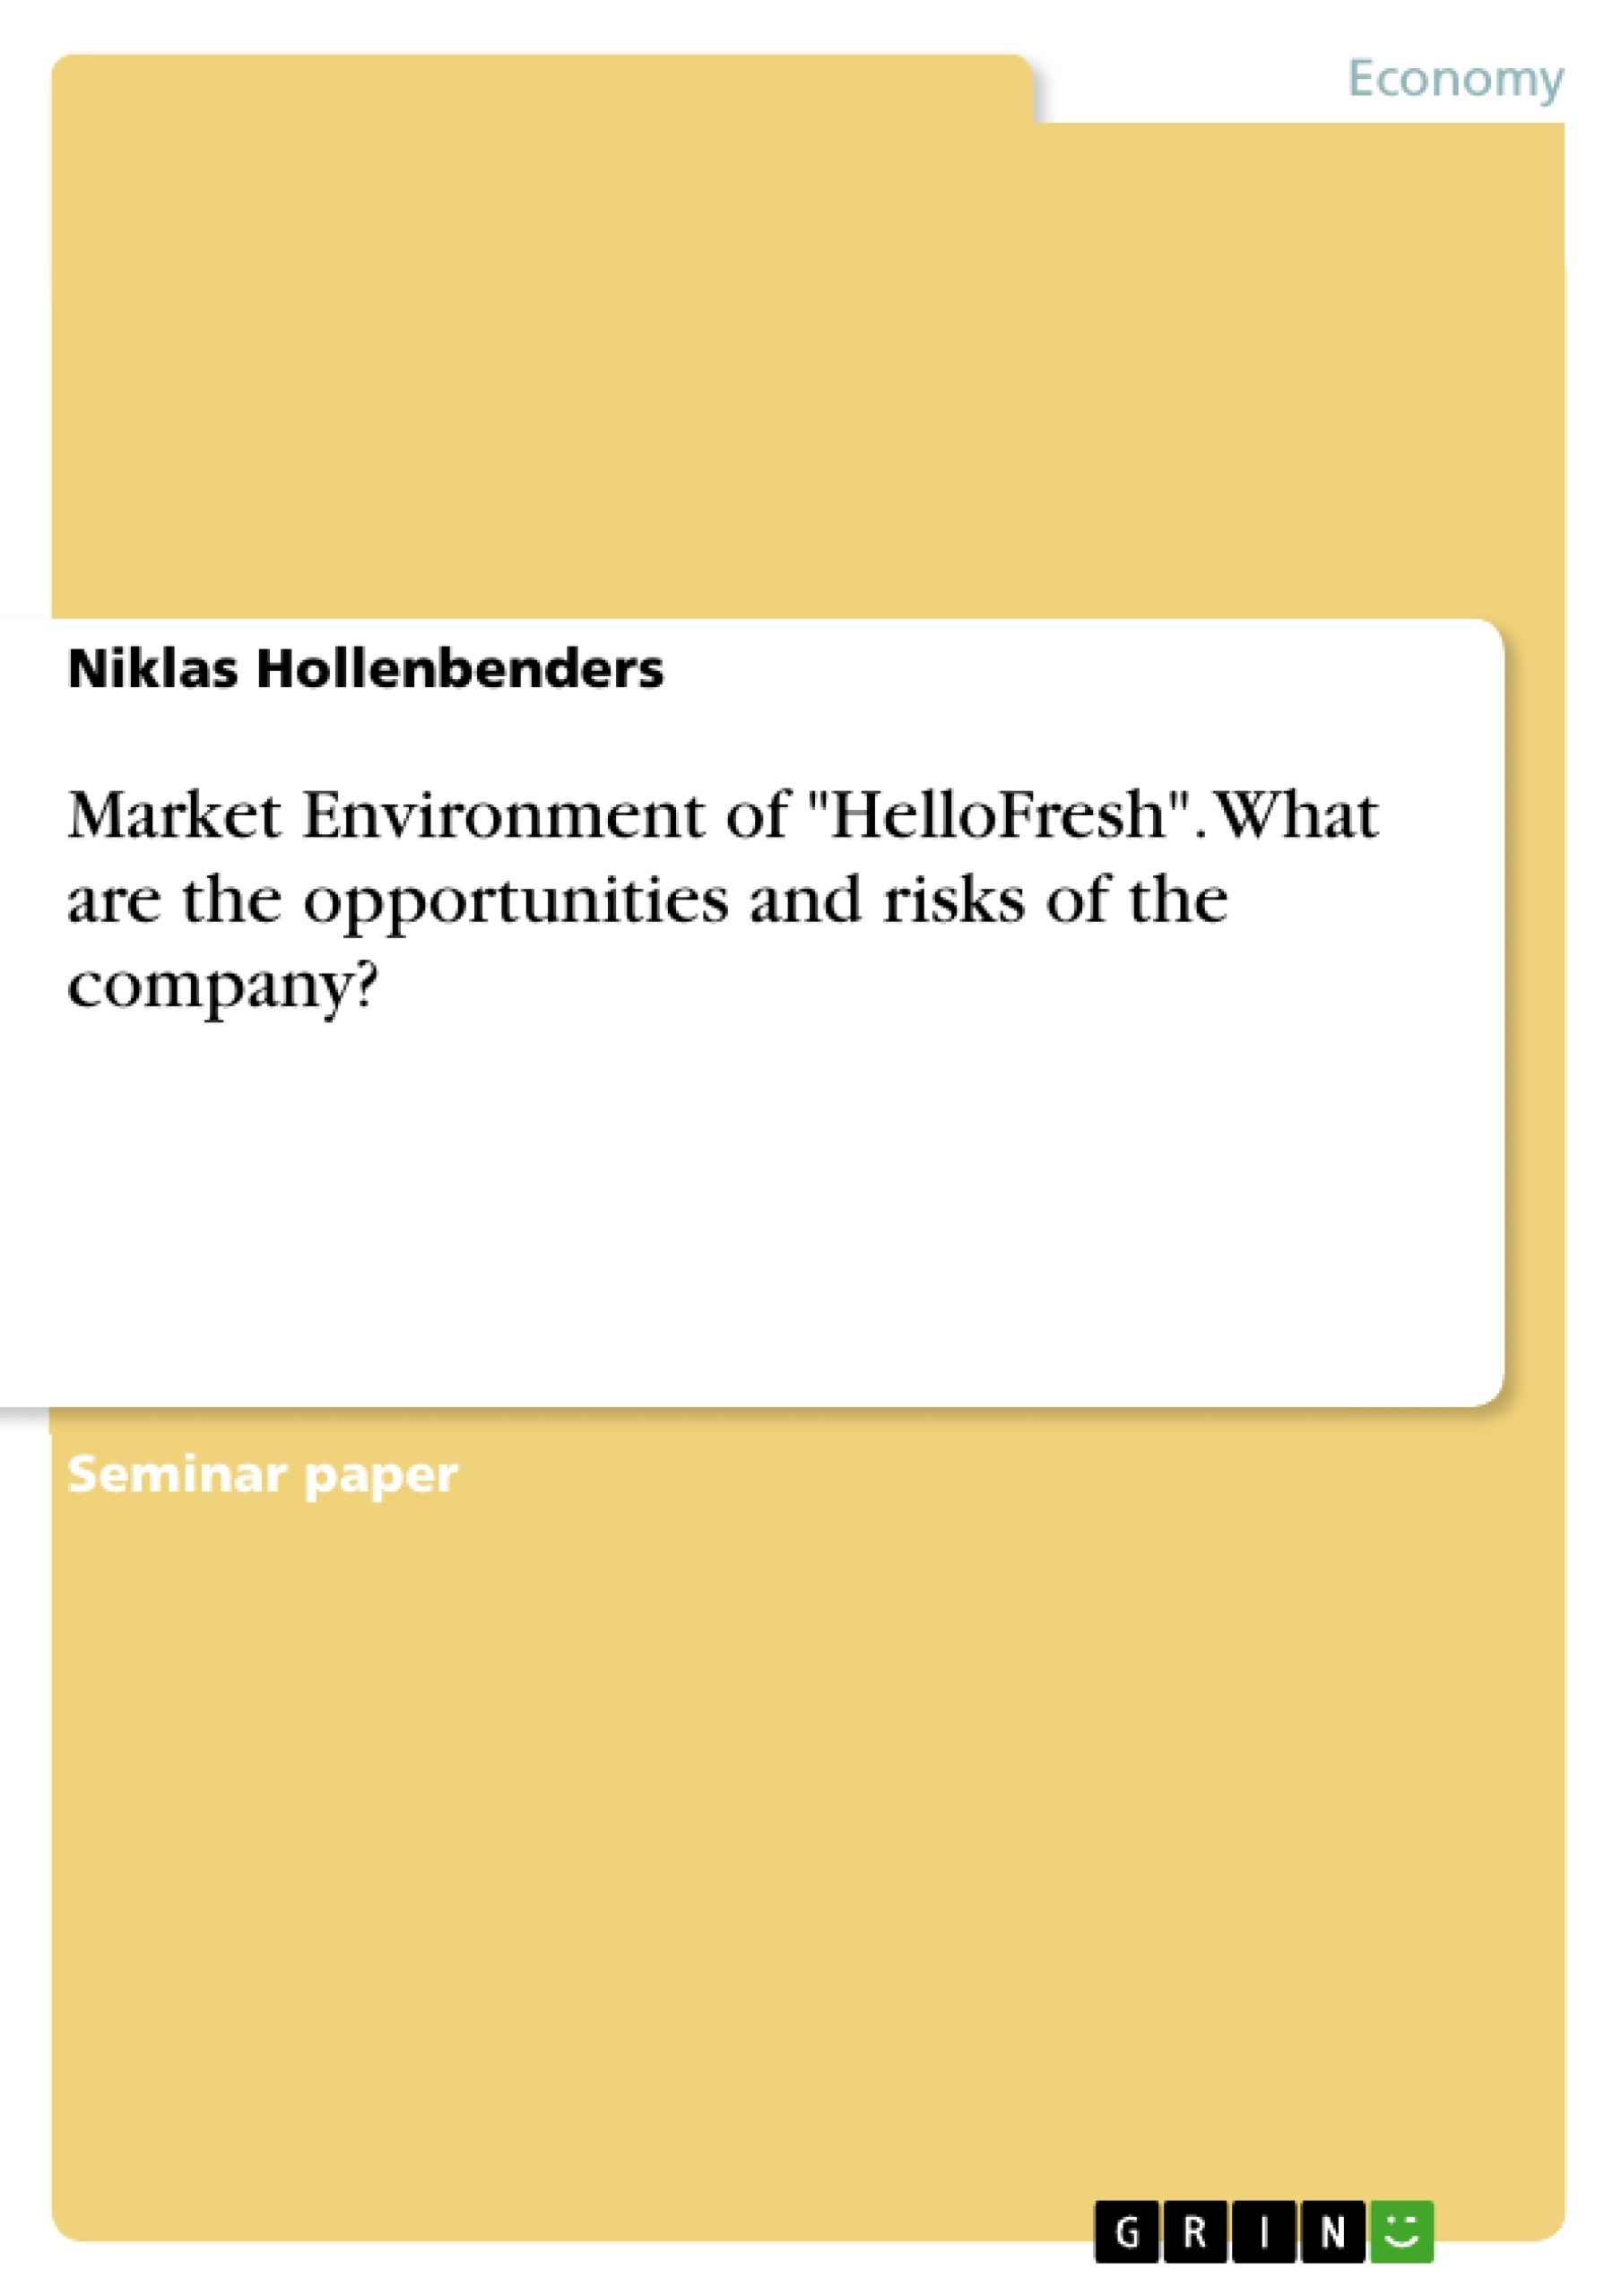 Title: Market Environment of "HelloFresh". What are the opportunities and risks of the company?